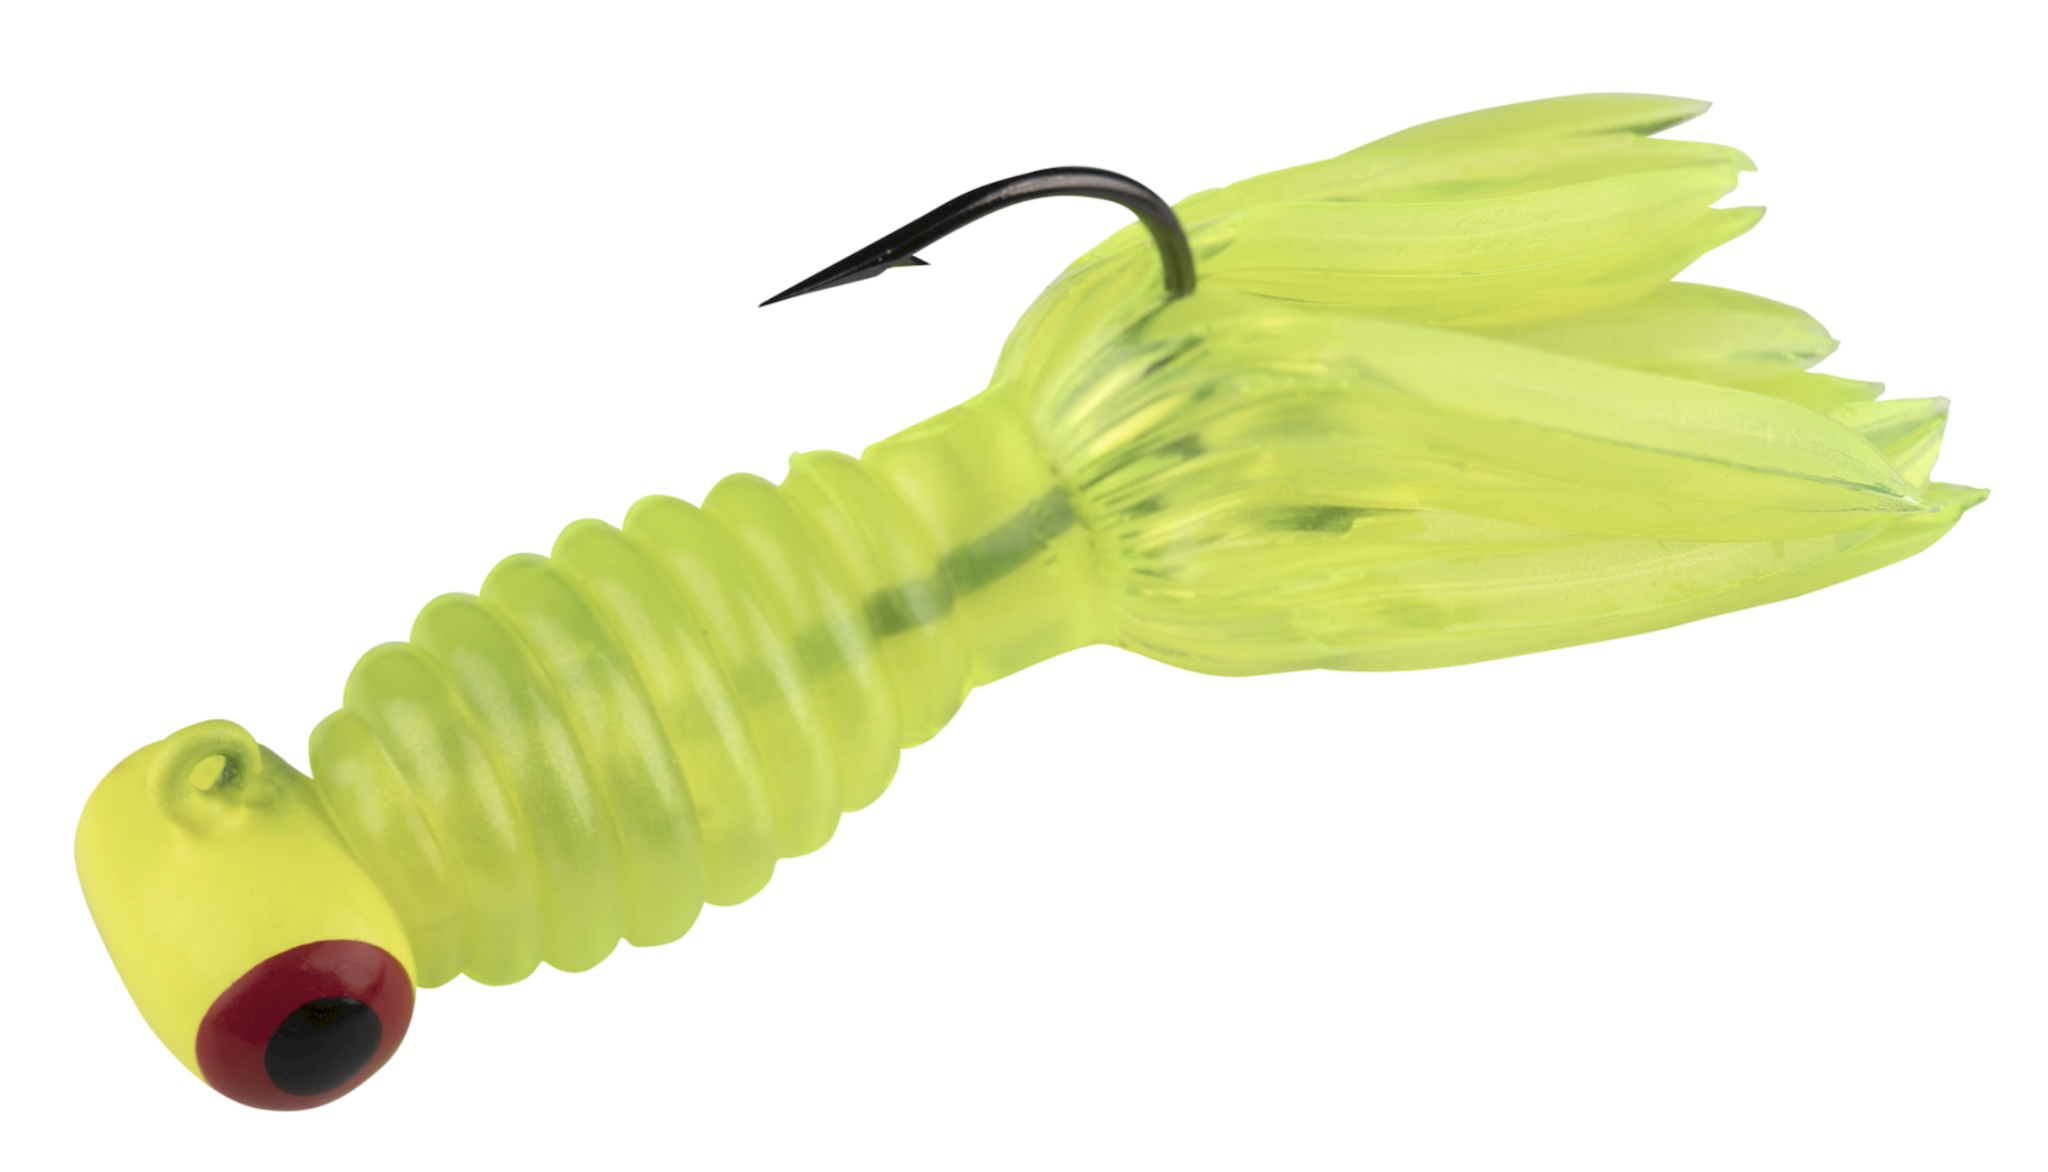 Strike King Mr Crappie Sausage Head 1/16oz 3-pk Hot Chartreuse - Gagnon  Sporting Goods